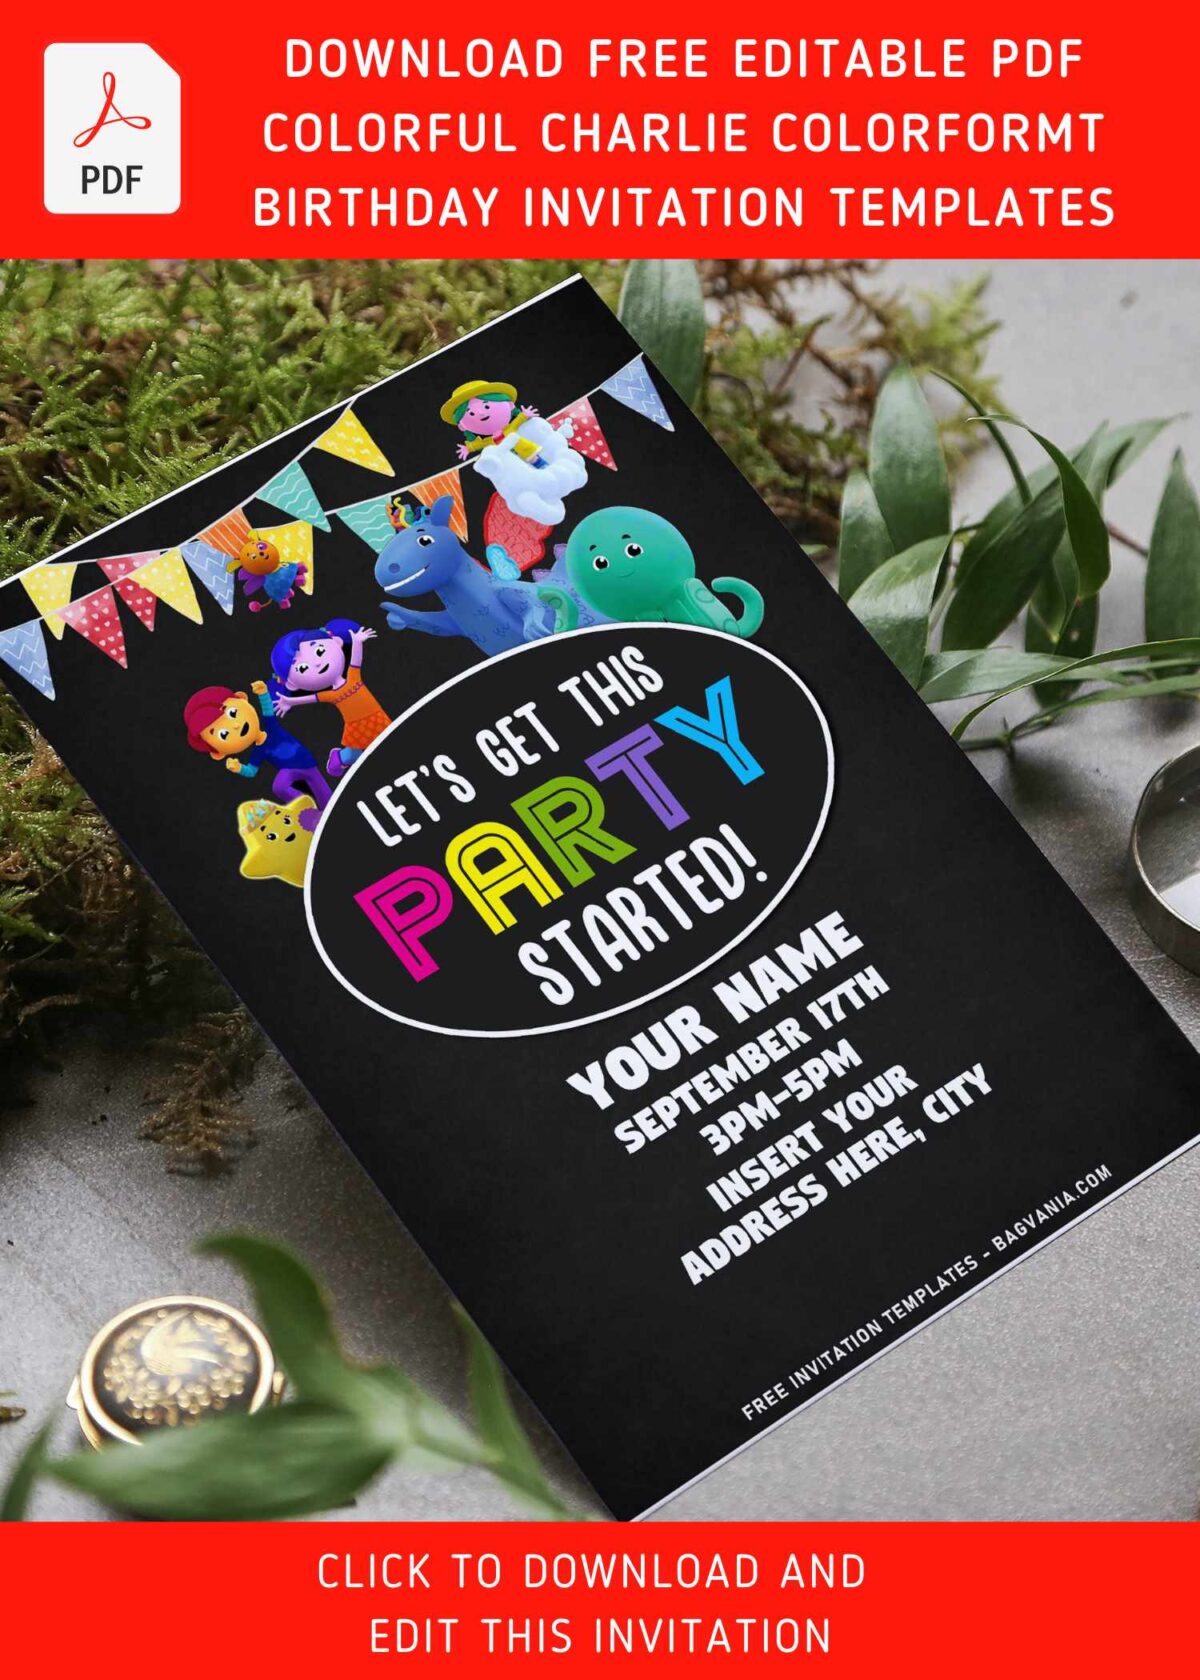 (Free Editable PDF) Chalkboard Charlie's Colorform City Birthday Invitation Templates with cute and catchy wordings